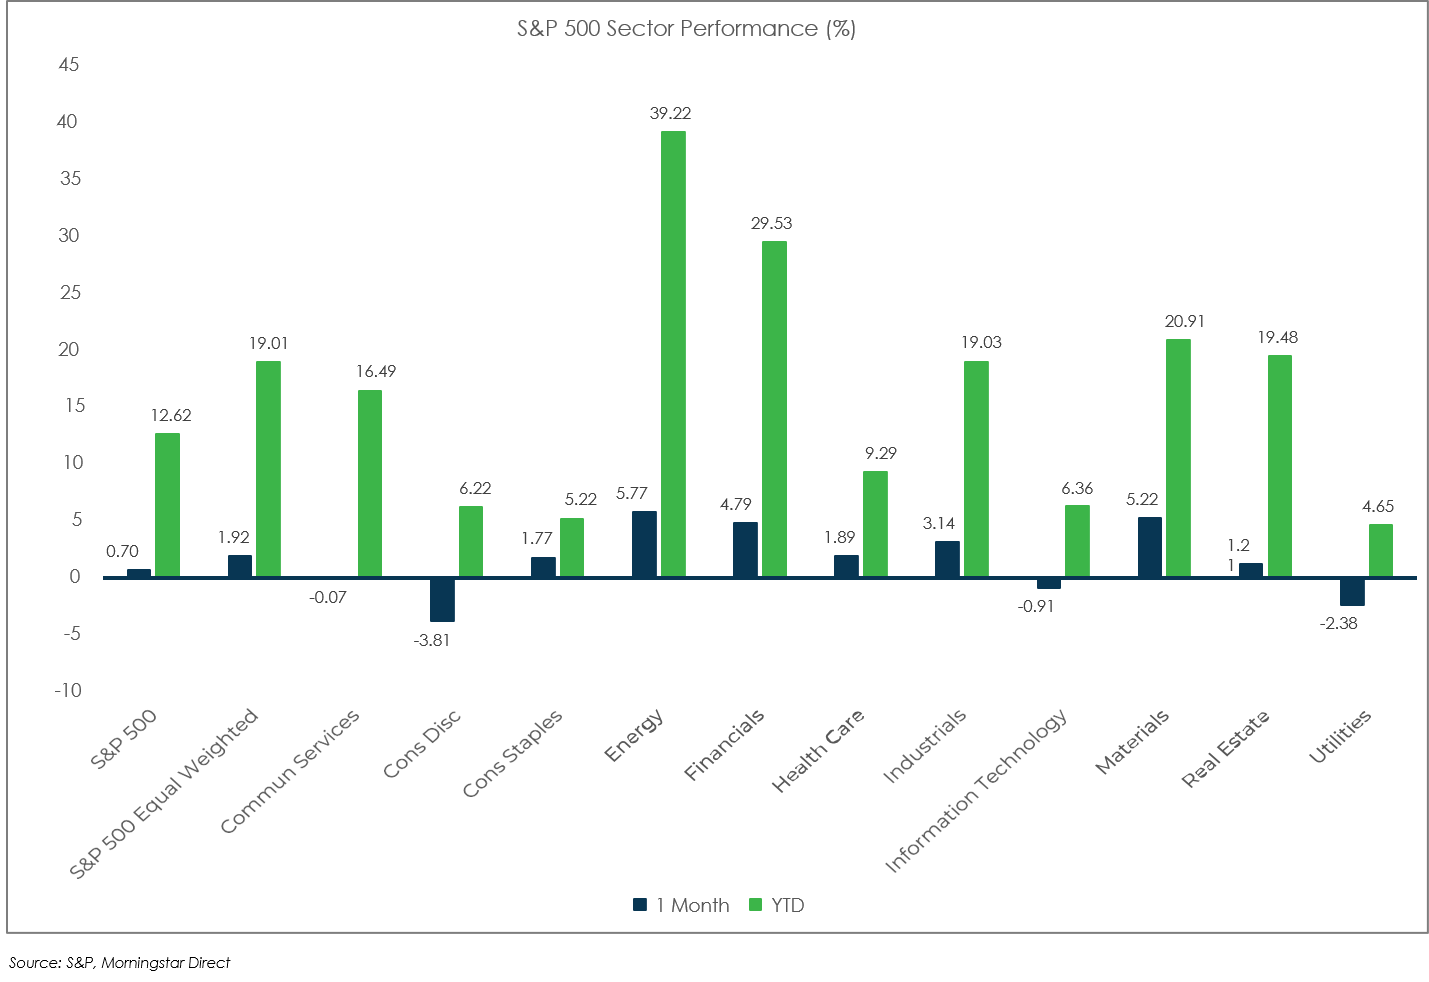 Sector Performance: S&P 500 - May 2021